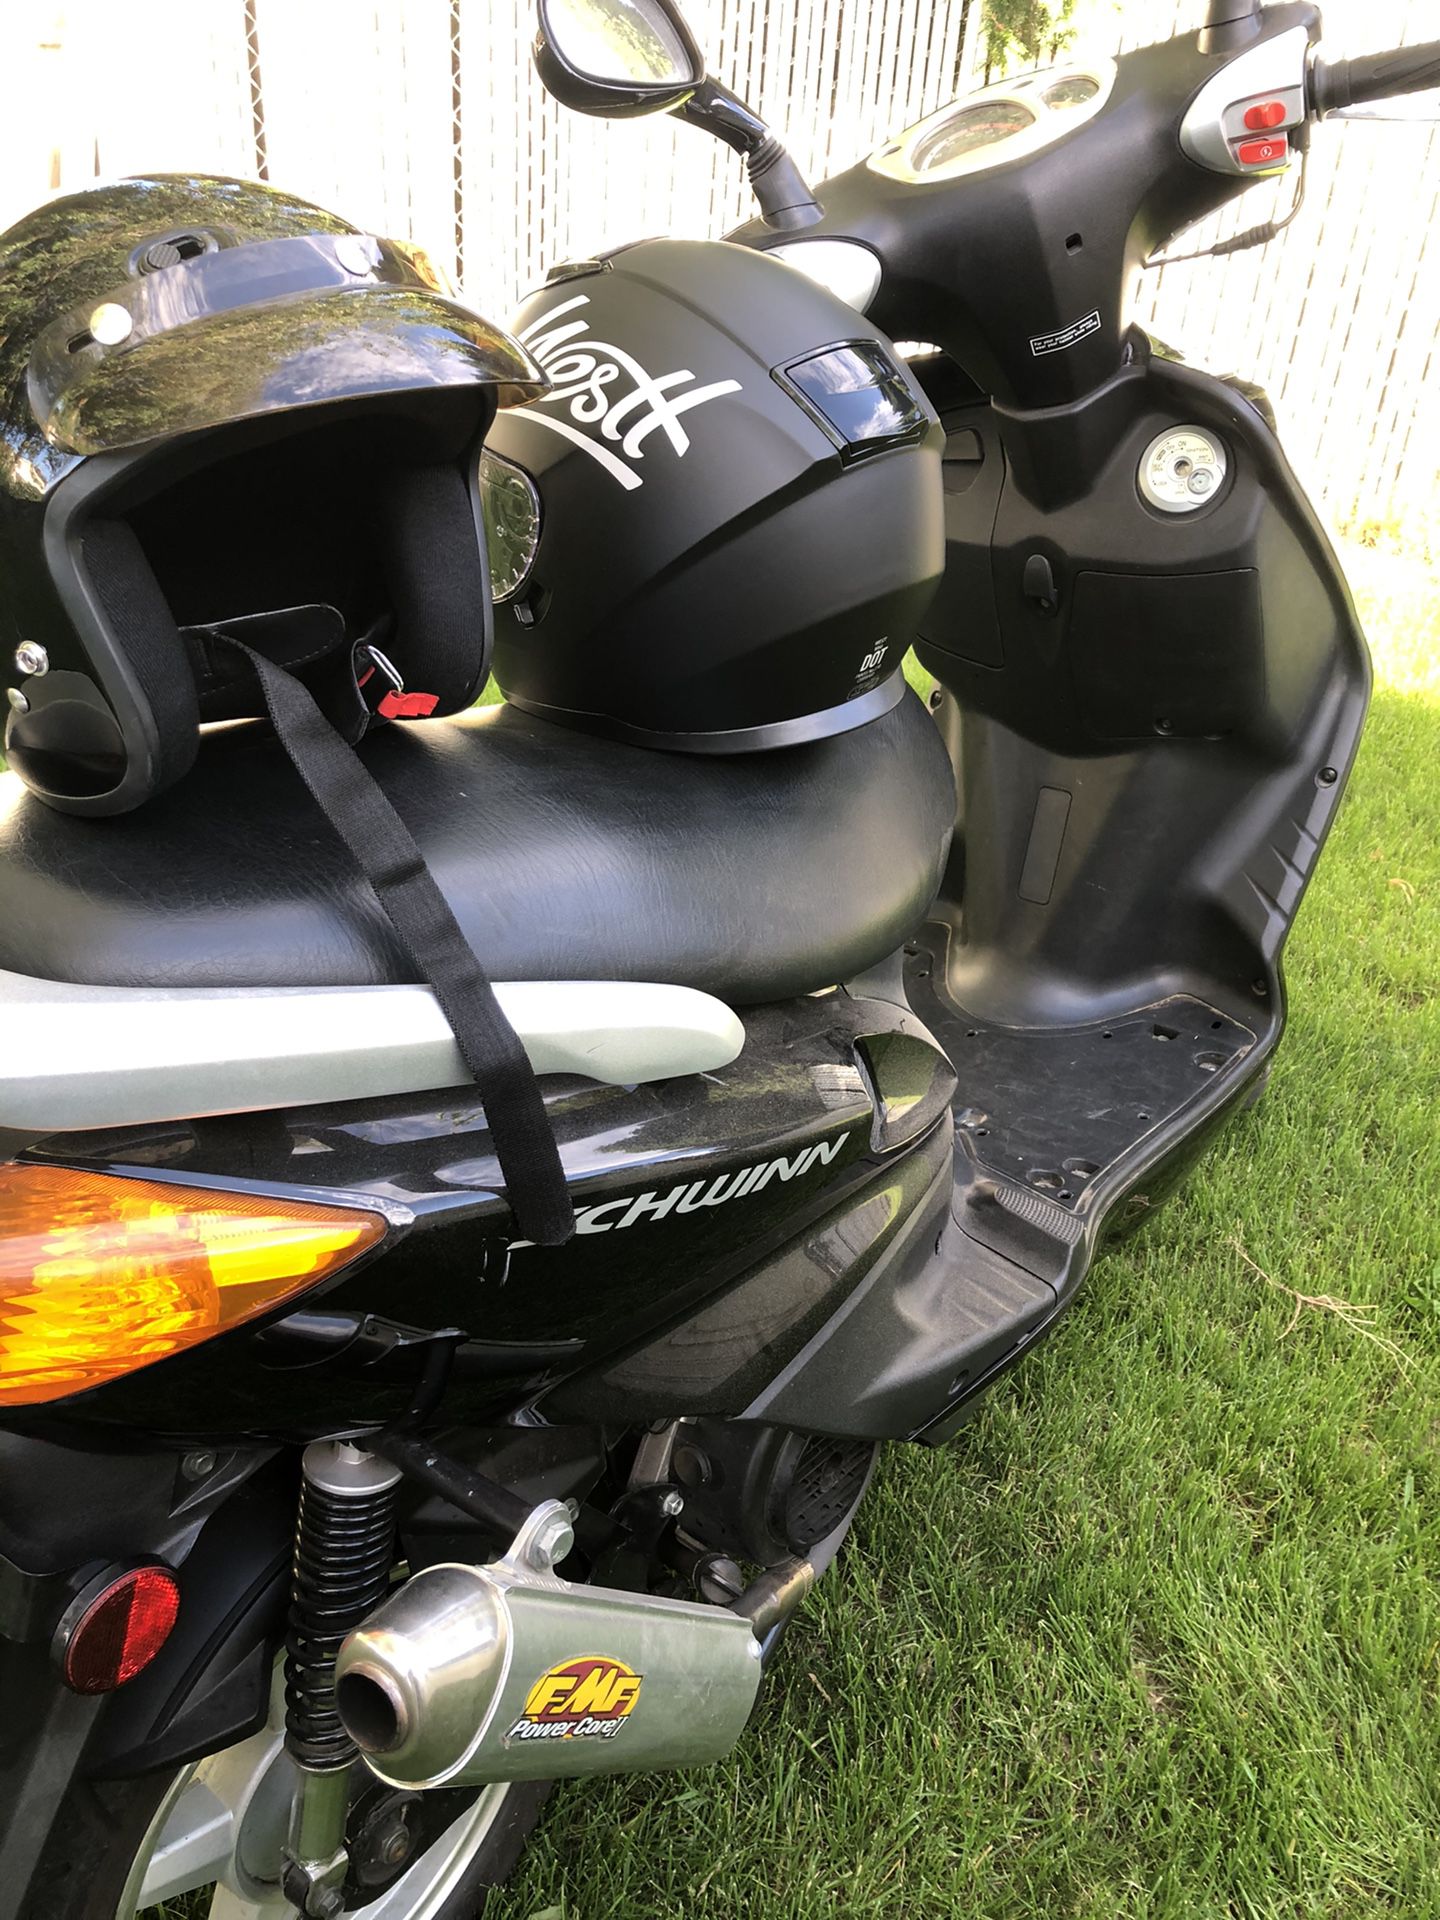 Photo For Sale Motorcycle Scooter